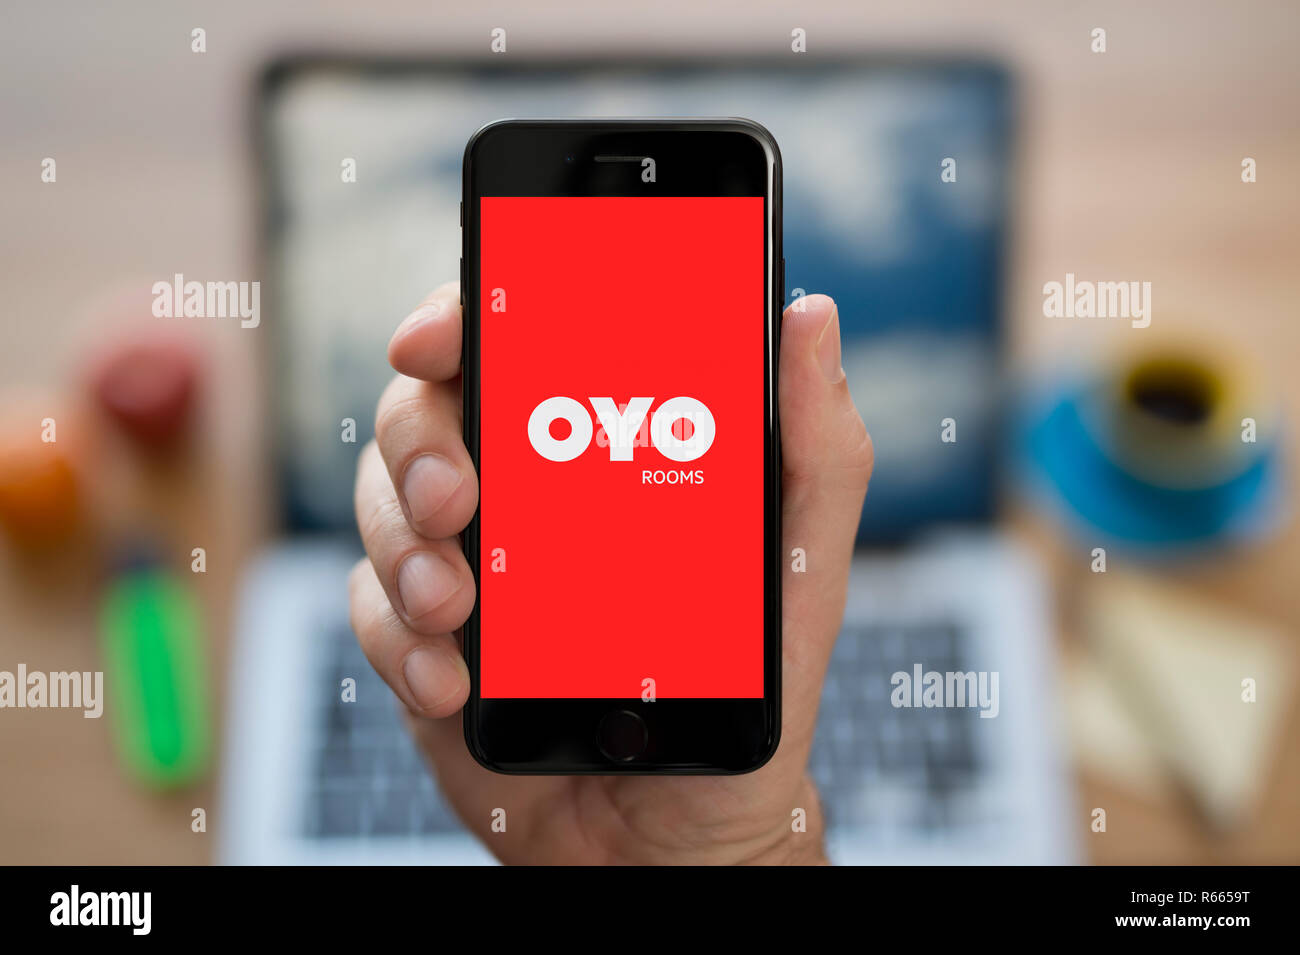 A man looks at his iPhone which displays the Oyo Rooms logo, while sat at his computer desk (Editorial use only). Stock Photo